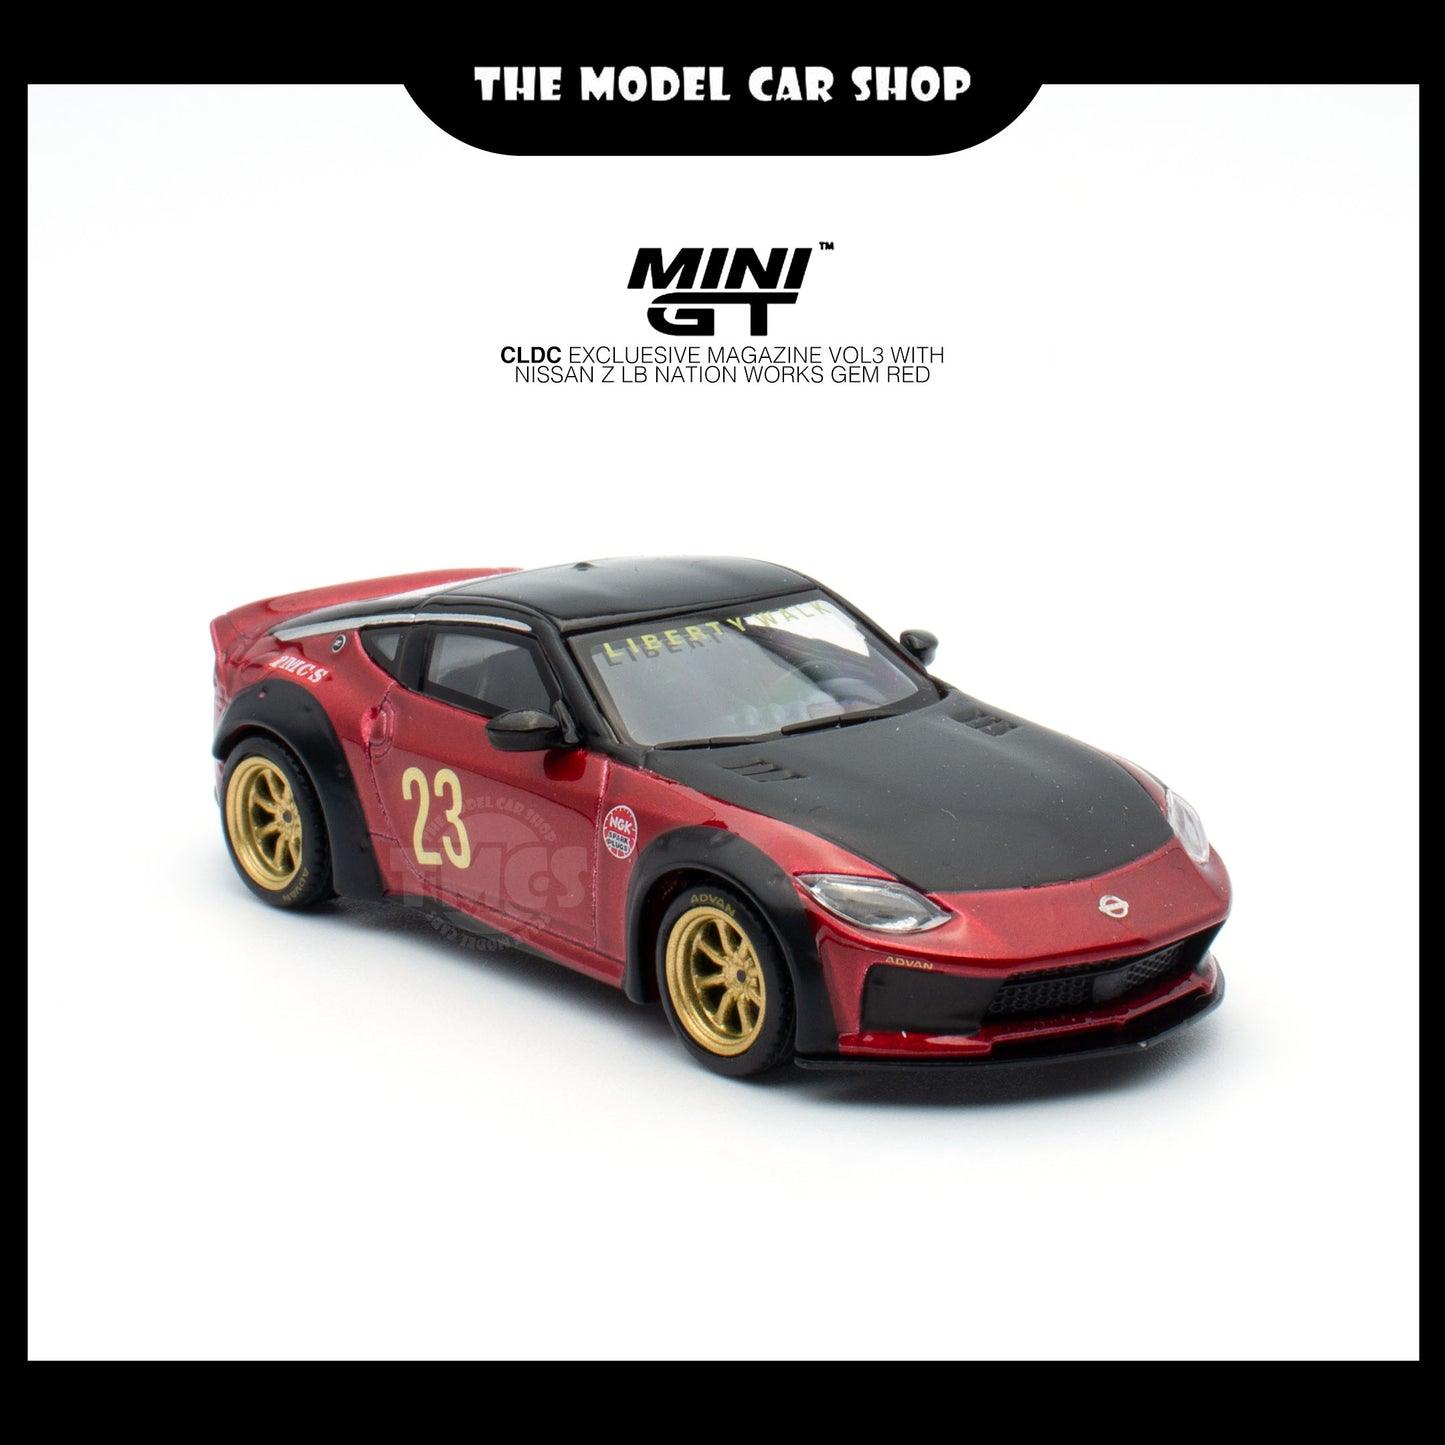 [MINI GT] CLDC Exclusive Magazine VOL3 with Nissan Z LB Nation Works Gem Red - English Version